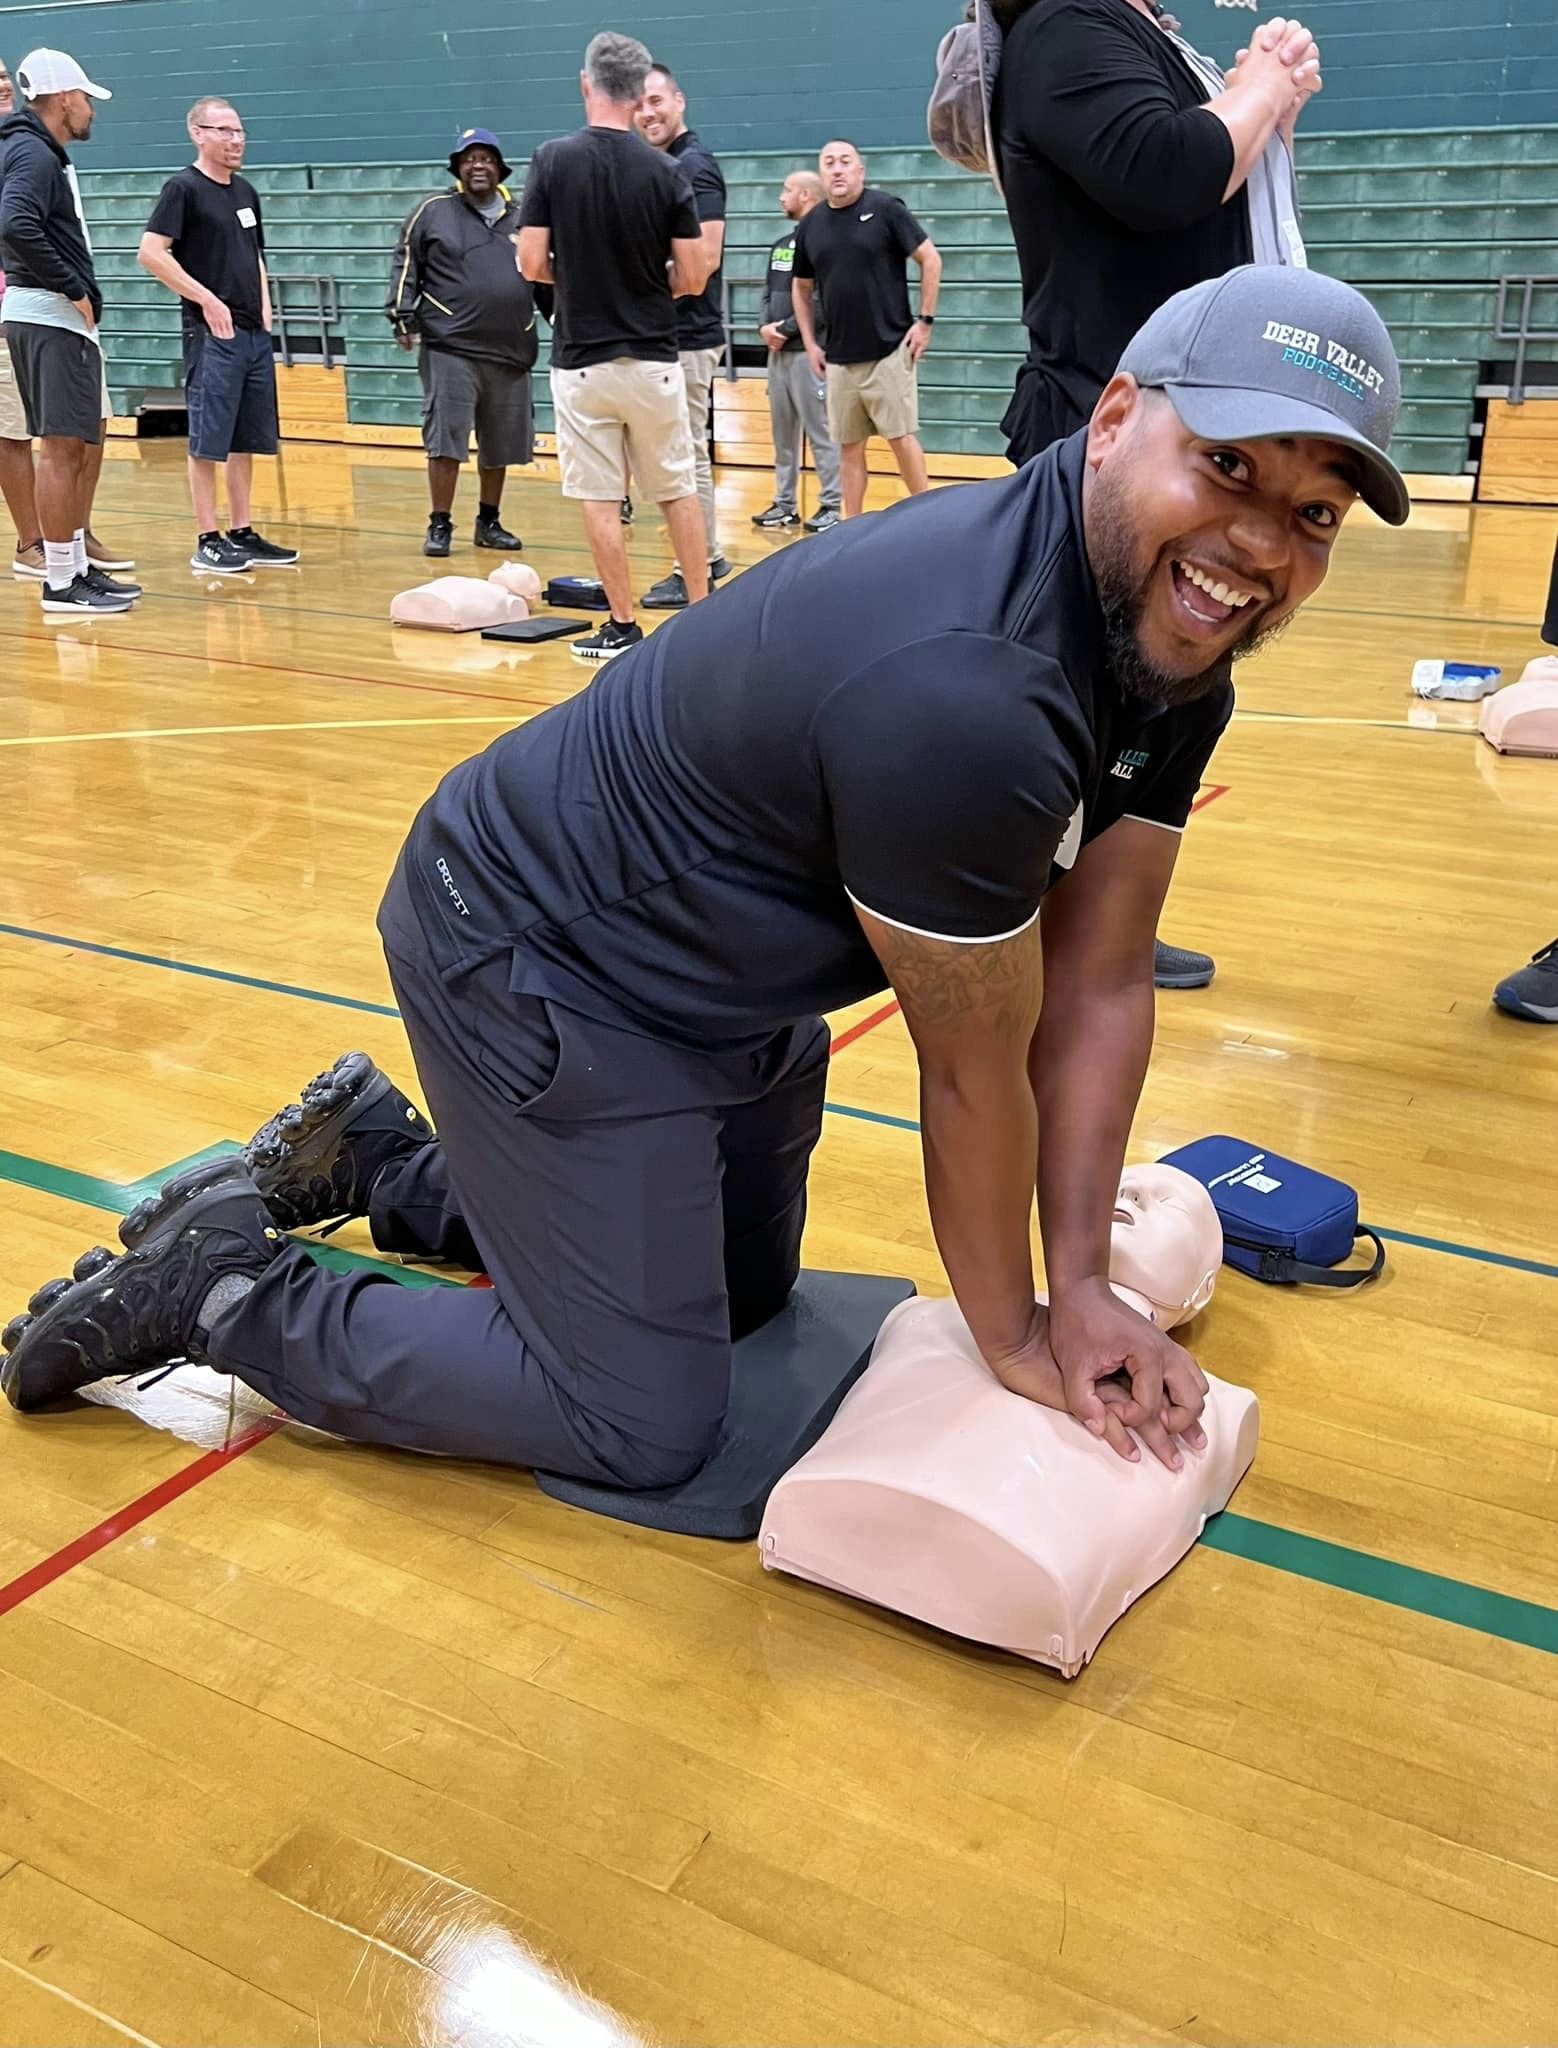 Coach engaged in CPR training